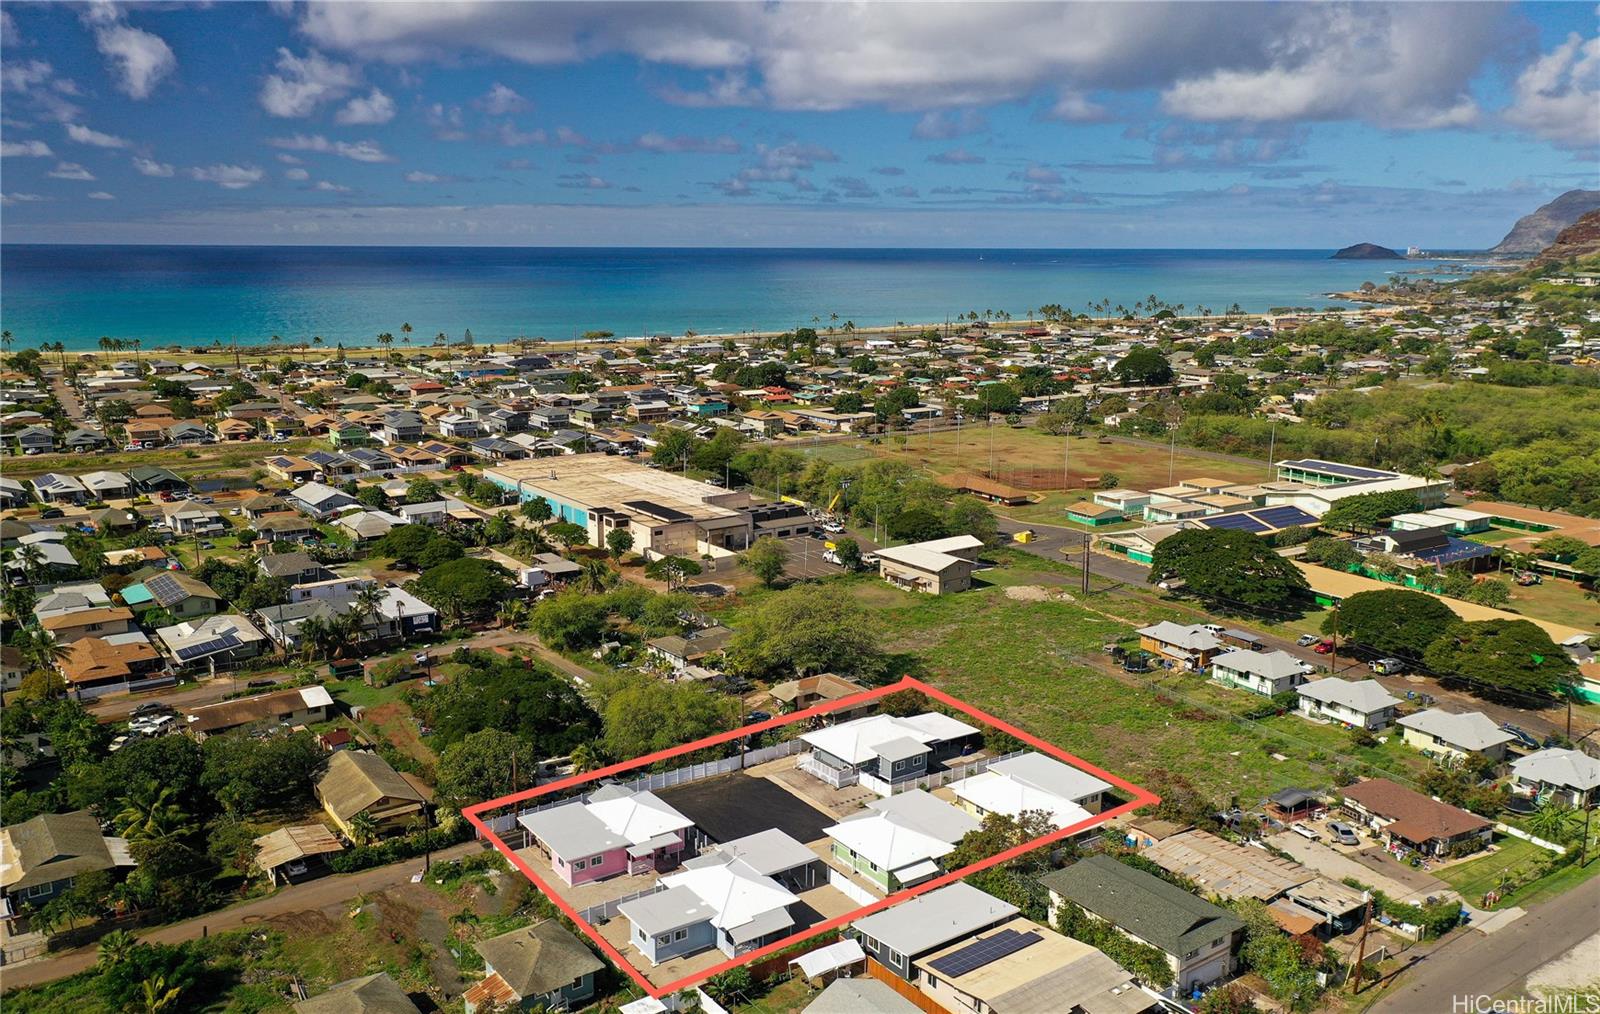 87-274D St Johns Road Waianae - Multi-family - photo 2 of 22